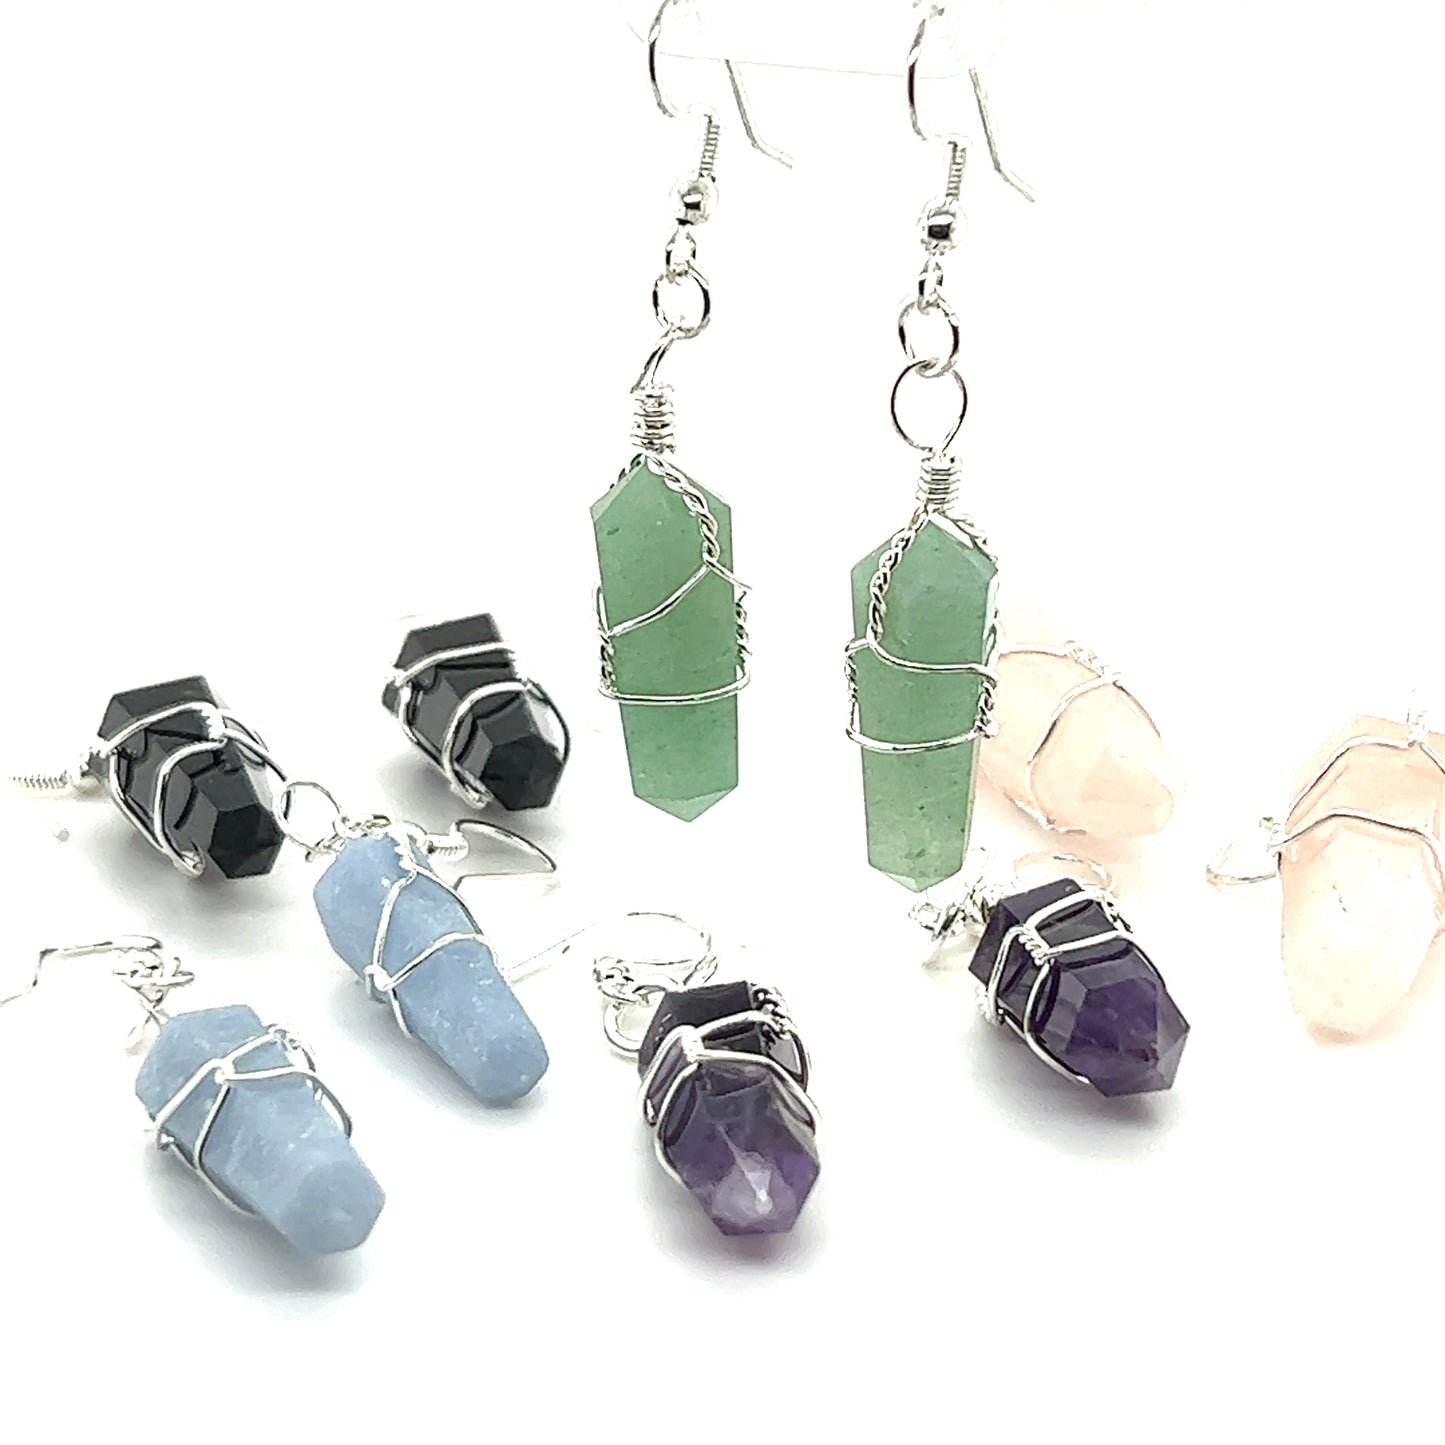 Super Silver's Wire Wrapped Stone Earrings are everyday wear earrings featuring genuine gemstones in mixed metals.